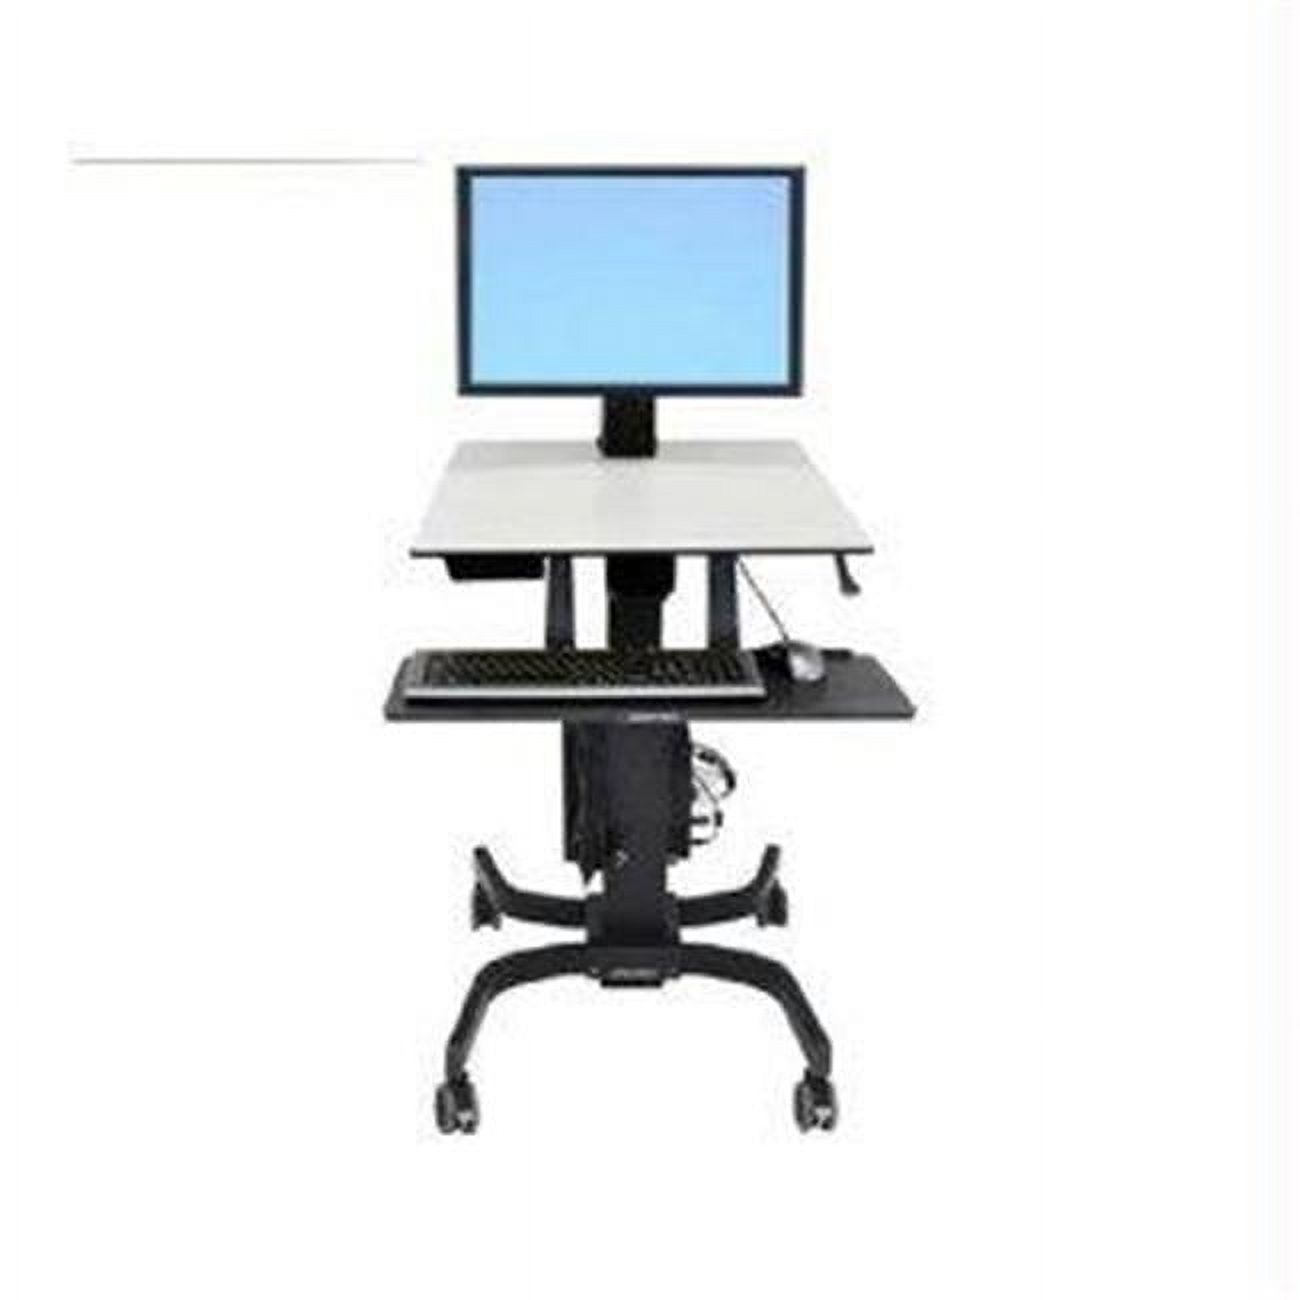 Ergotron 24-216-085 Workfit-C Sit-Stand Workstation For Single Large Display Hd With Mobile Cart B - image 1 of 2